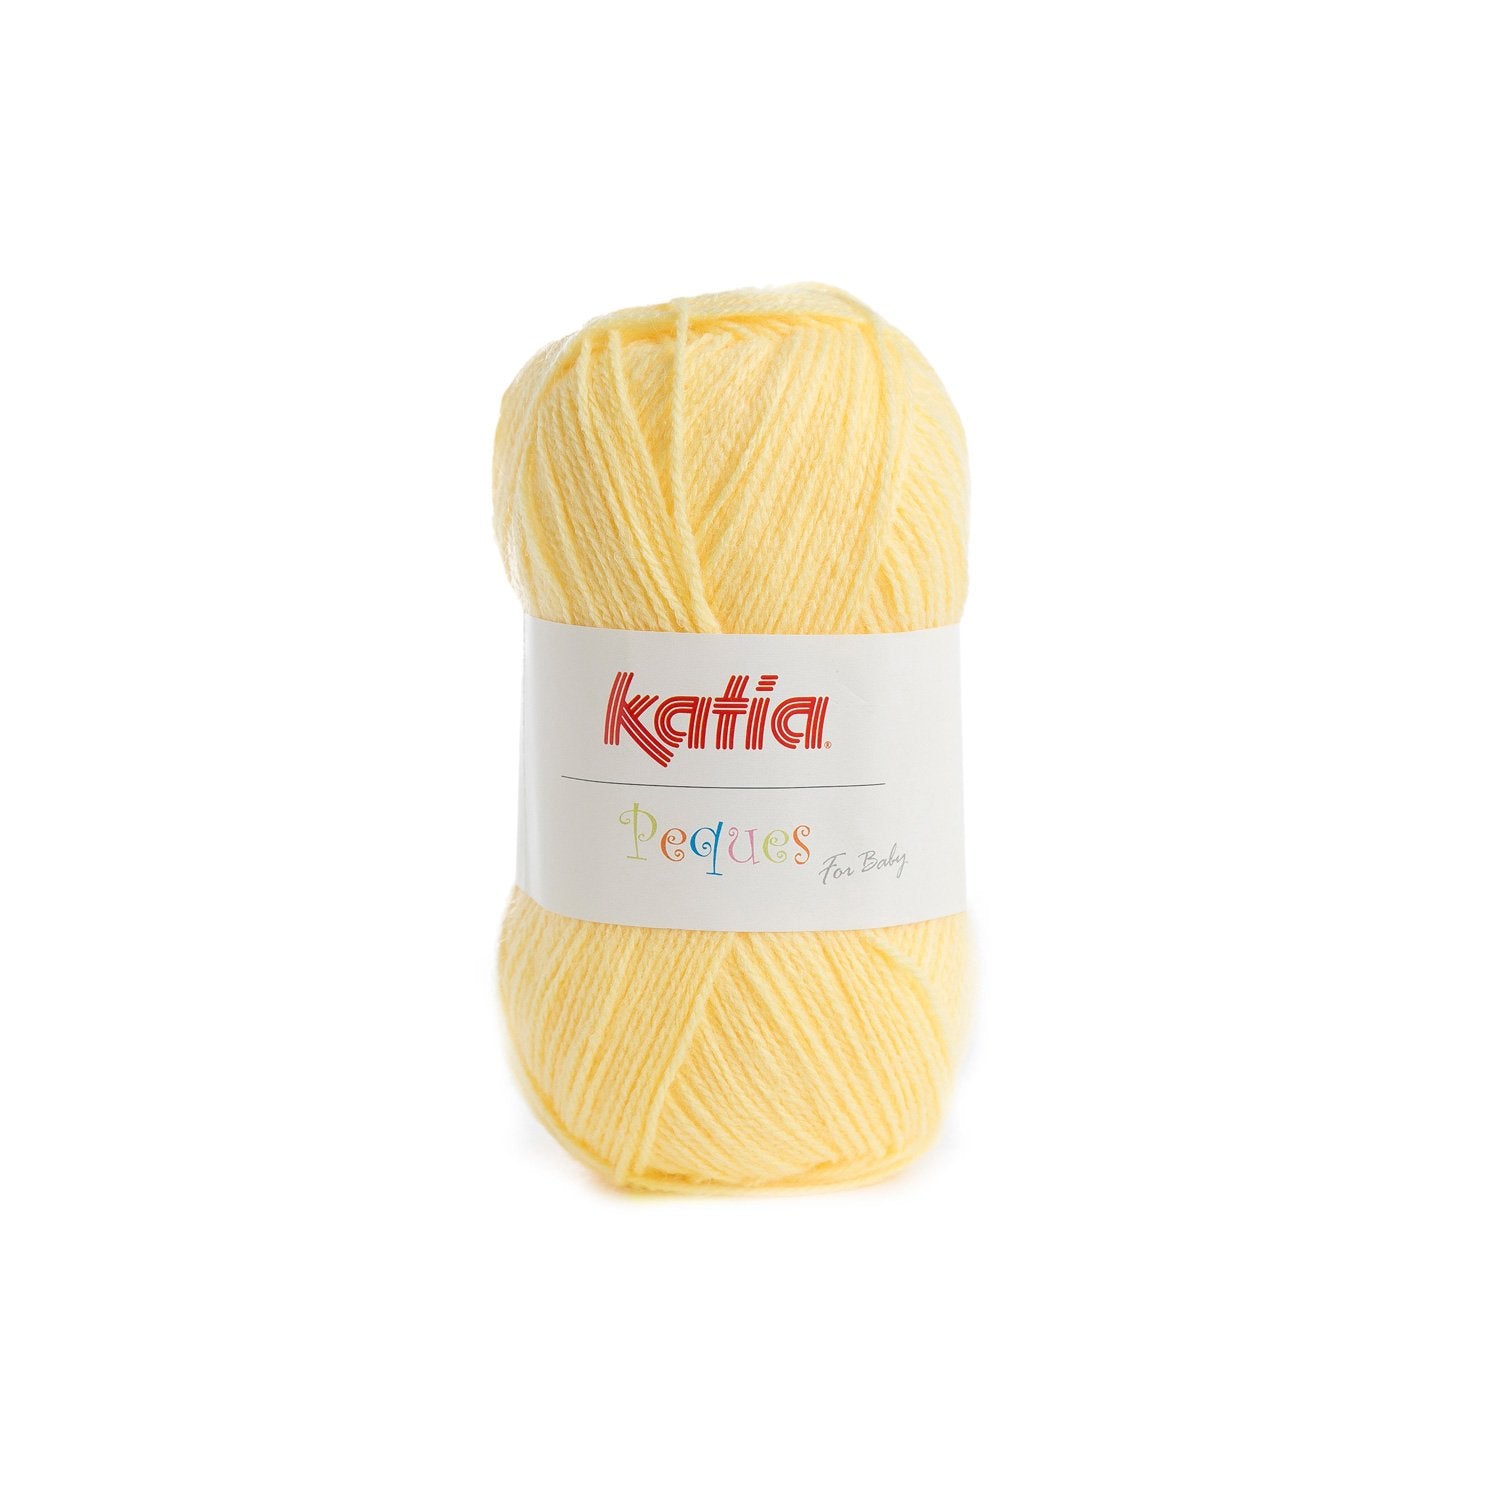 Katia Peques - Wool for Babies and Kids